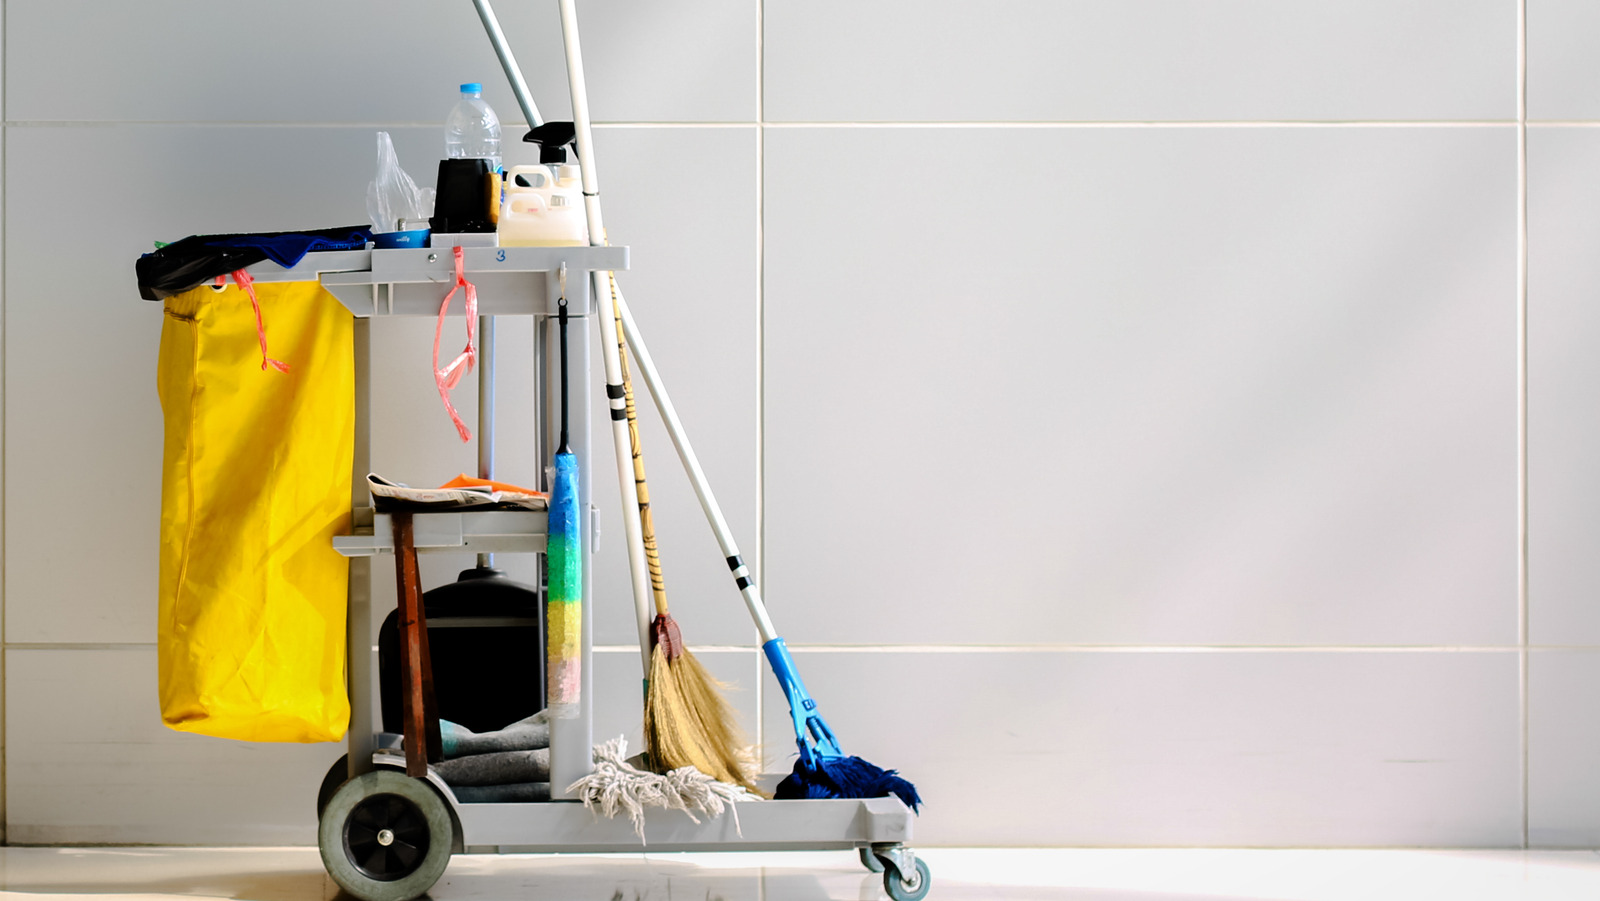 The Best Place to Store Your Cleaning Supplies